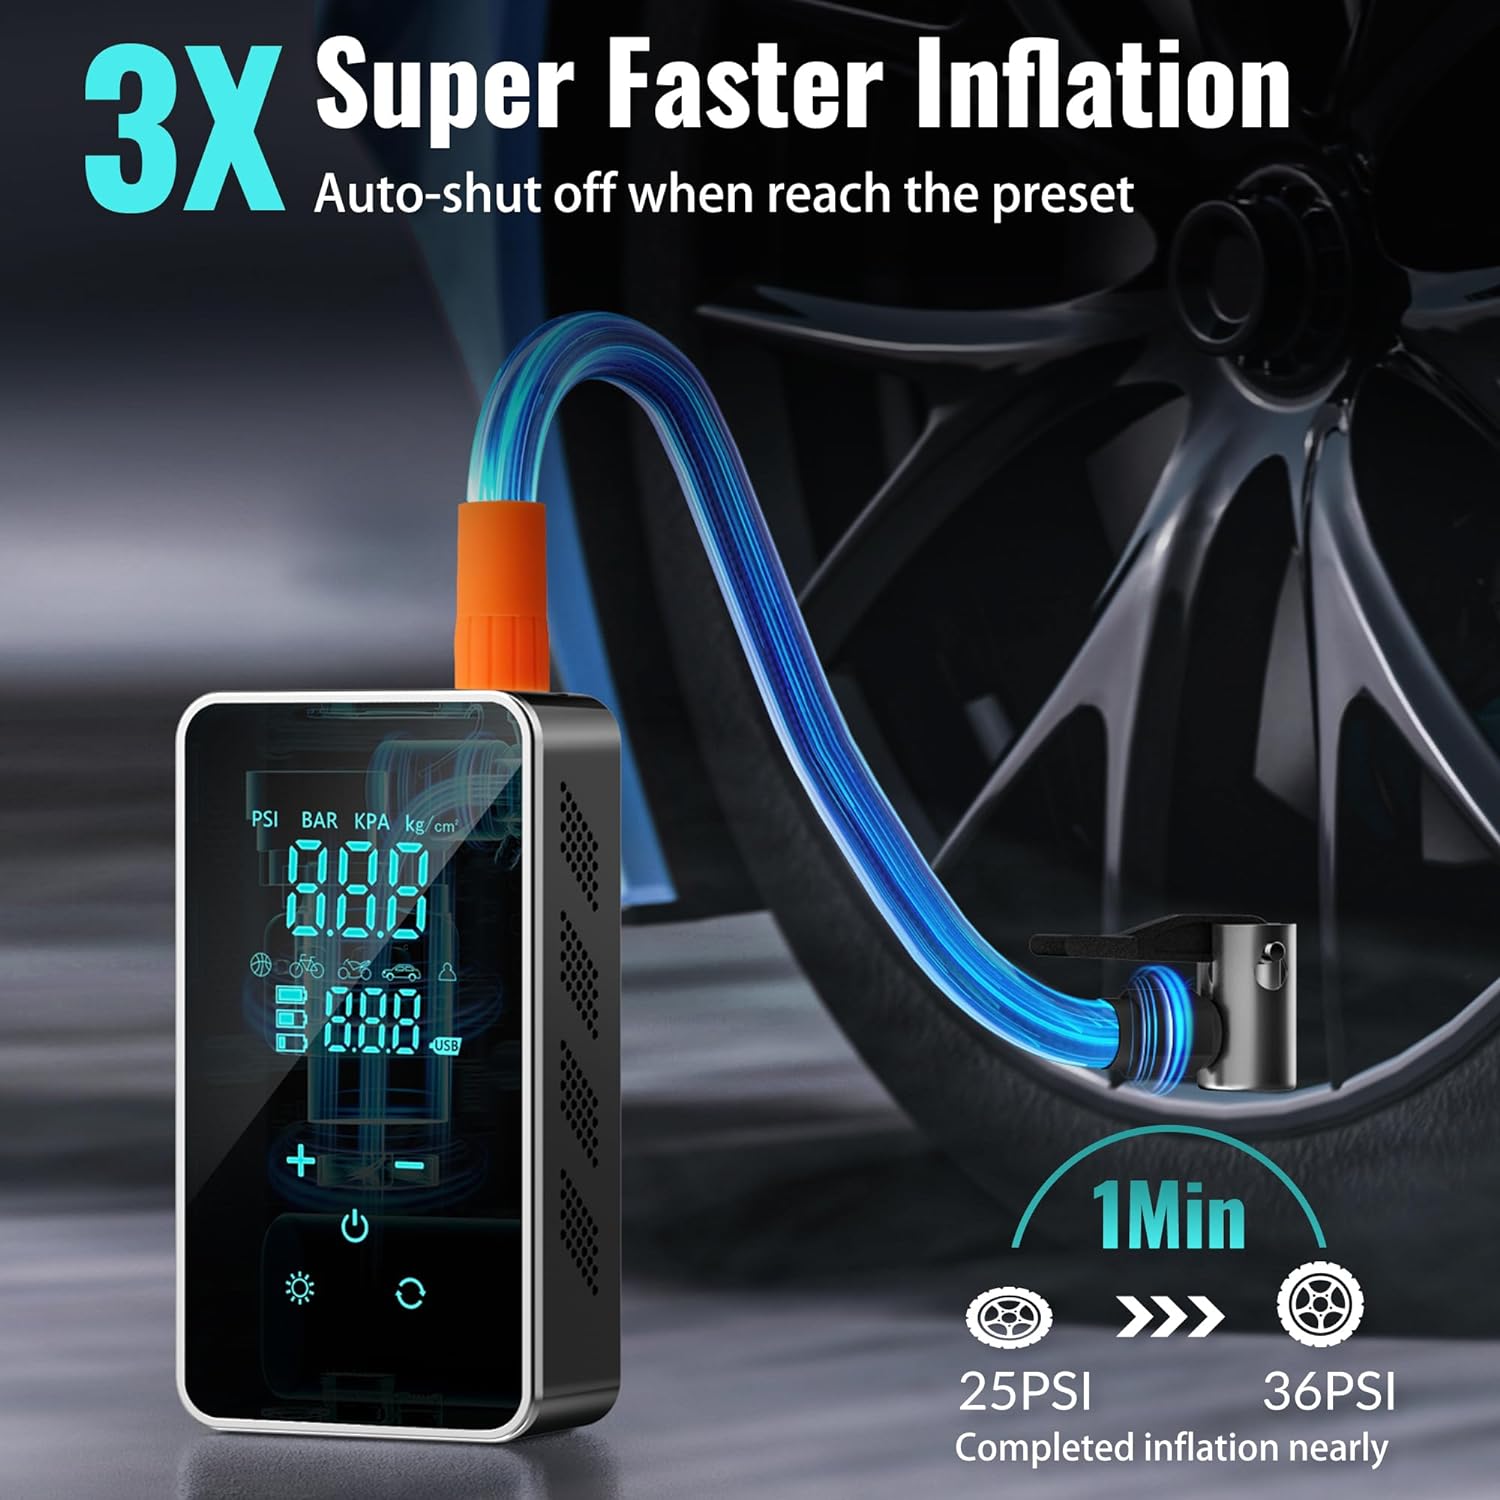 Tire Inflator Portable Air Compressor-Air Pump for Car-18000mAh Electric Air Compressor-Portable Air Pump Cordless-150 PSI Tire Pump with Touch Screen/Gauge/Light for Motorcycle, Bike, Ball (Black)